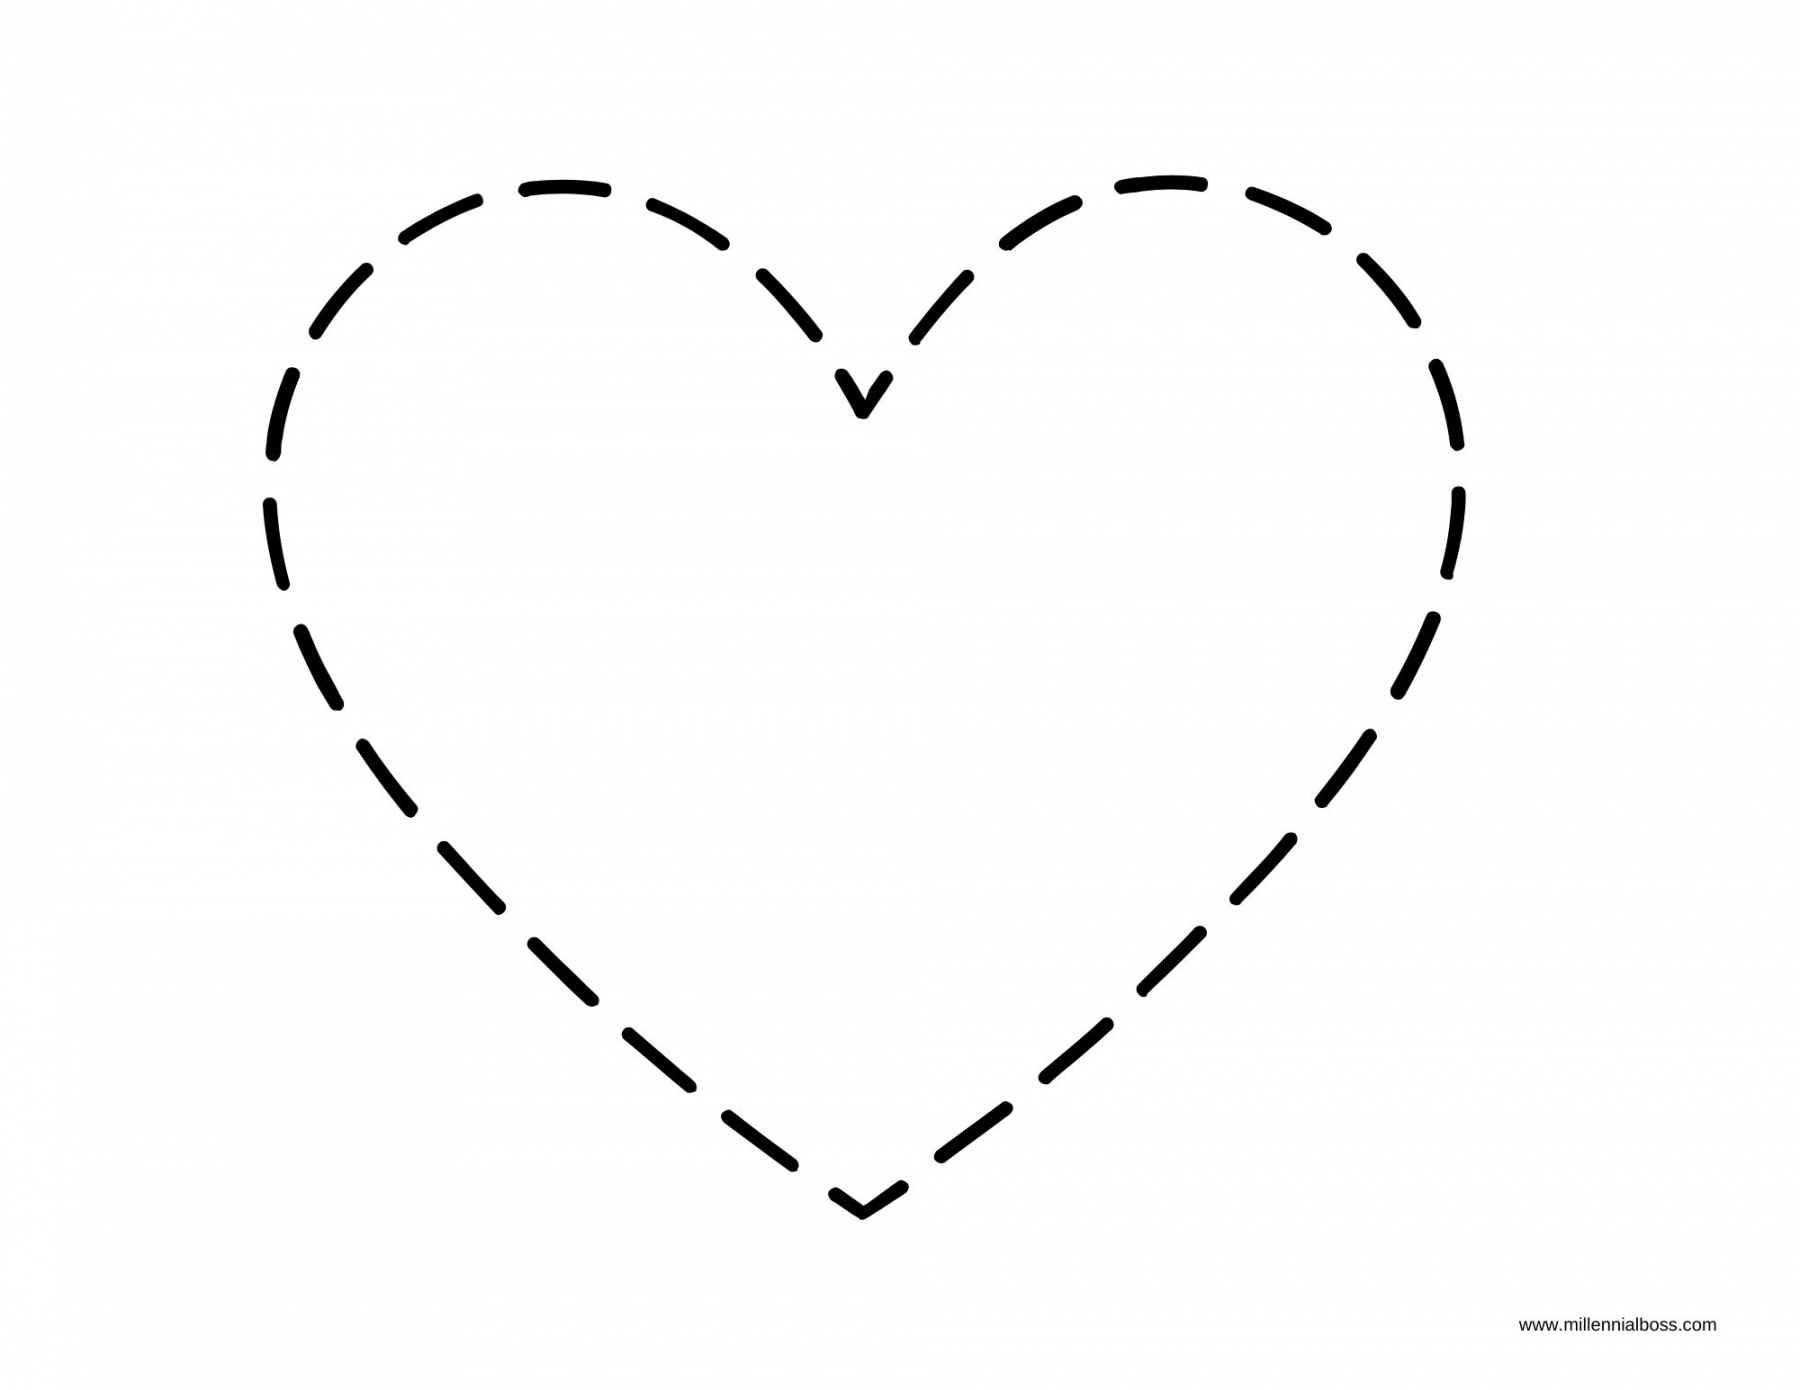 Free Printable Heart Templates - Printable - Free Heart Templates pdf in all different sizes